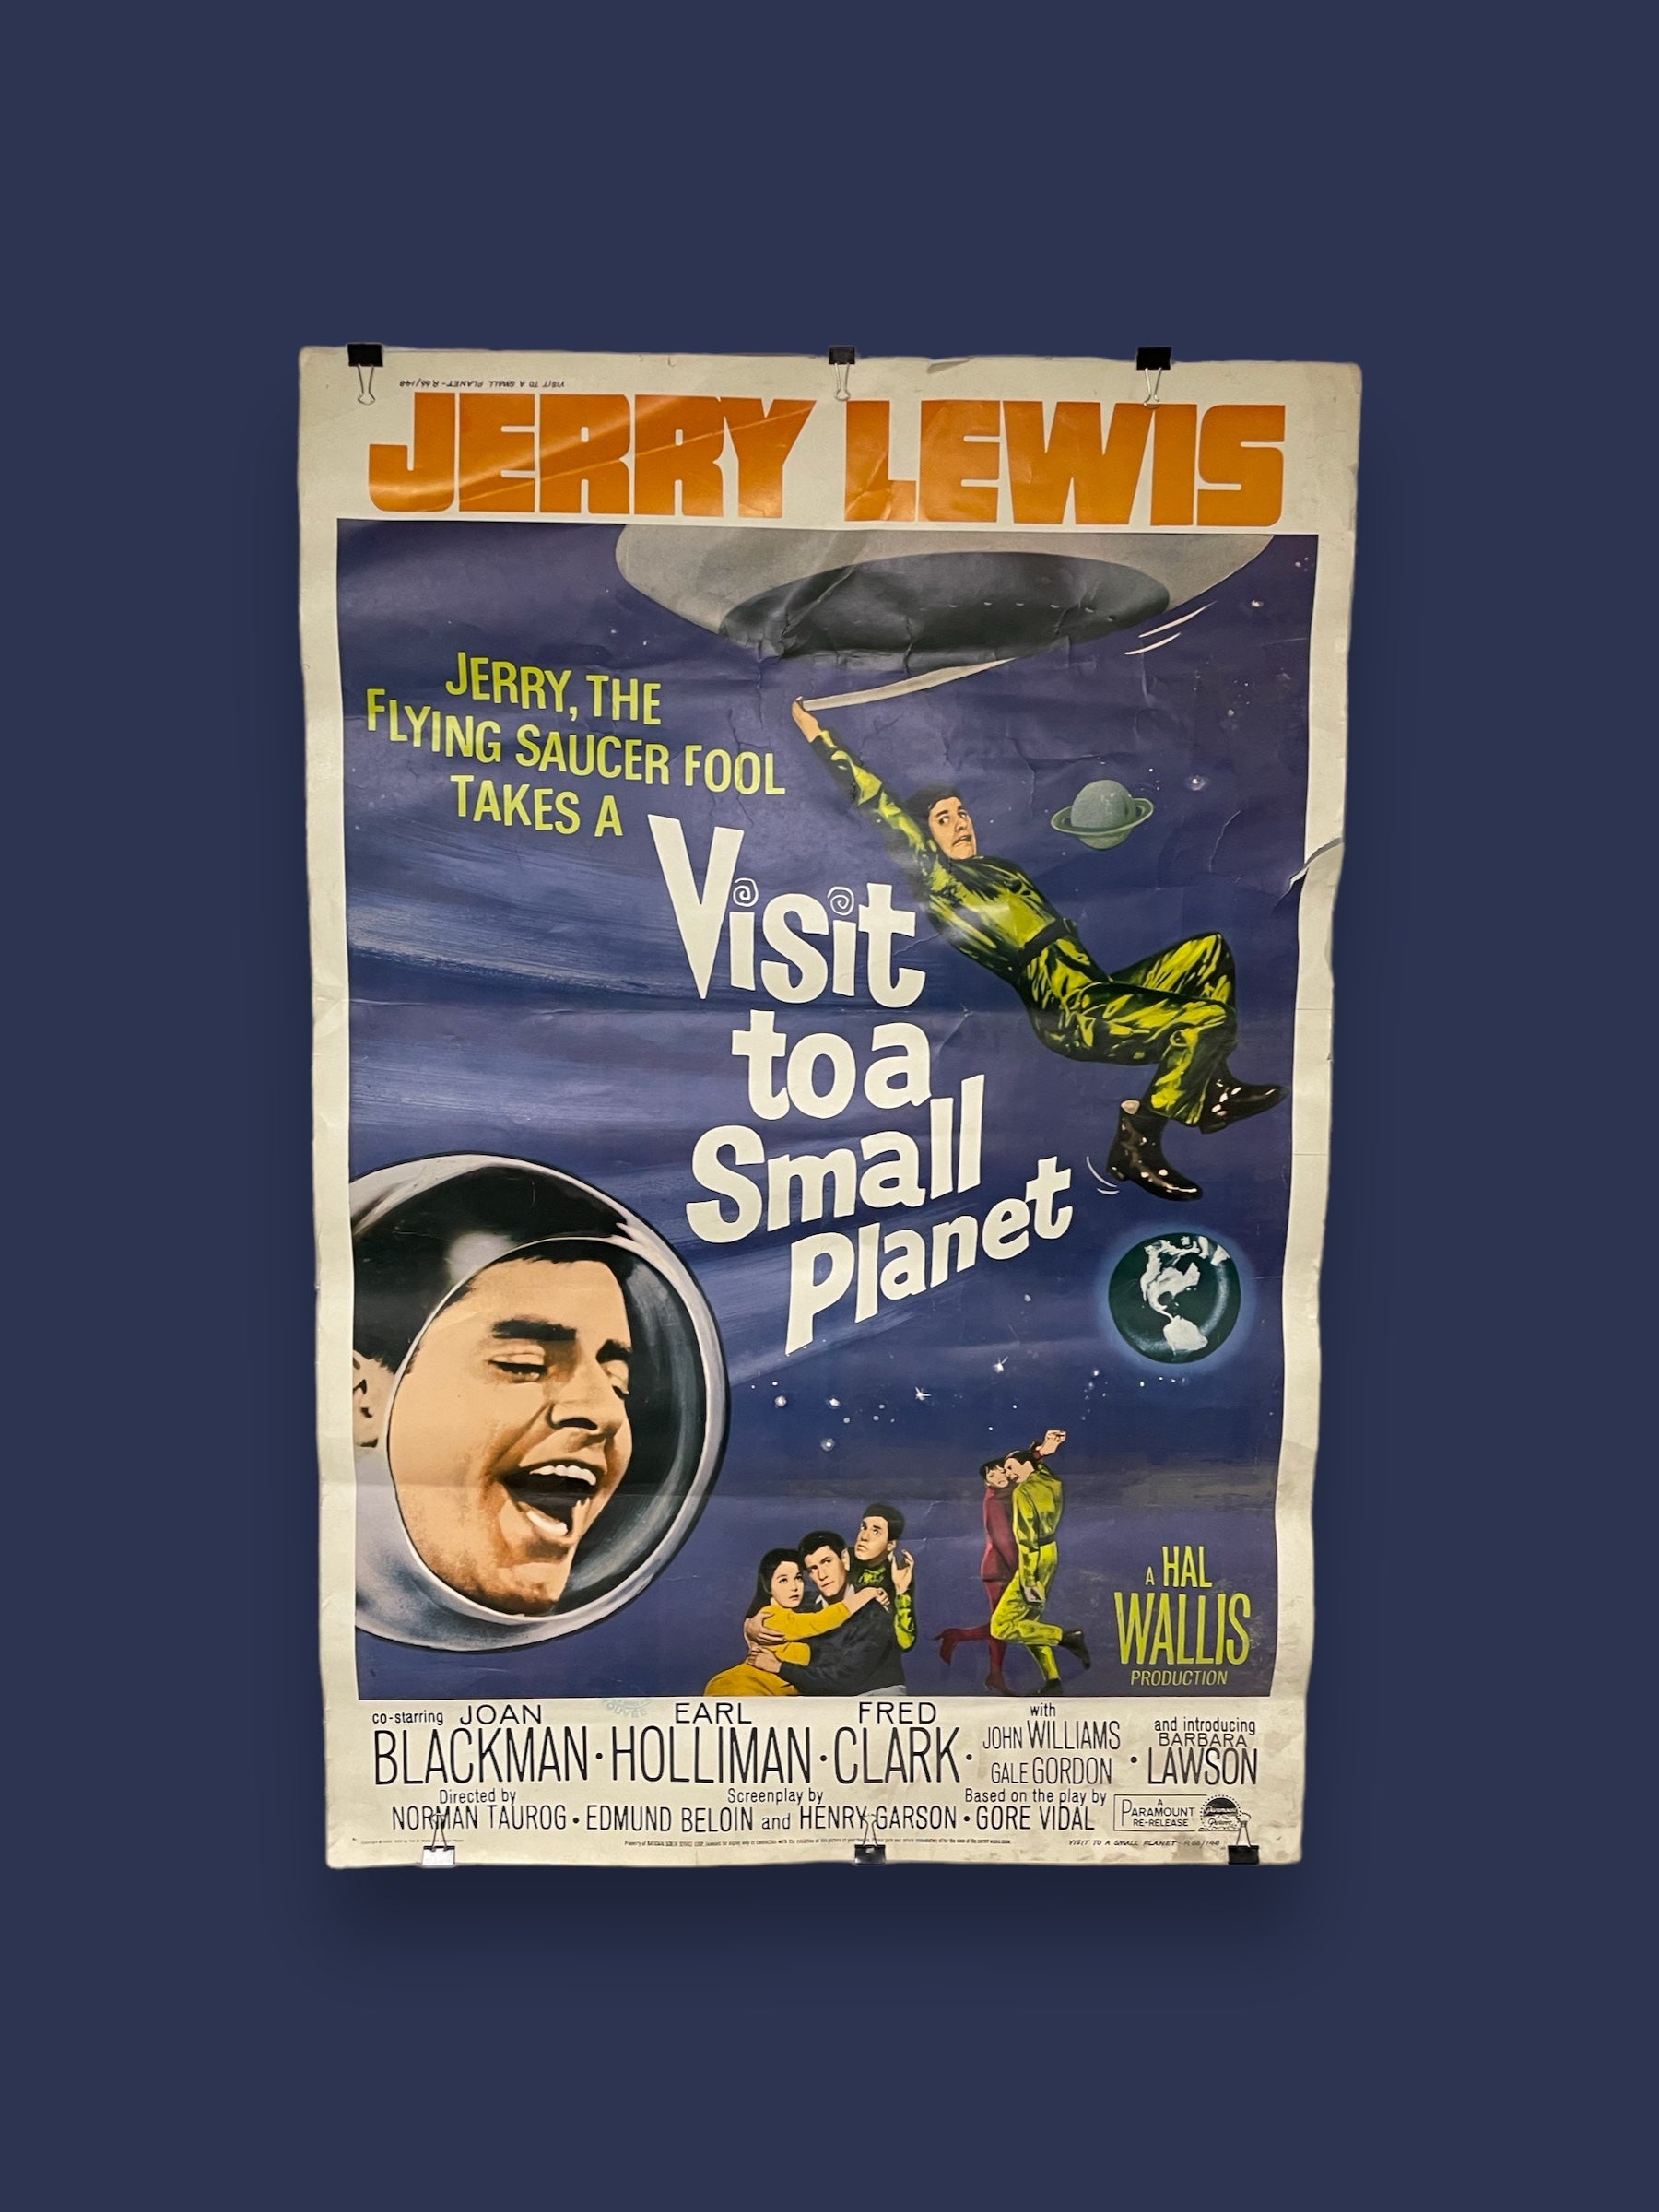 Vintage "Visit to a Small Planet" Jerry Lewis movie poster